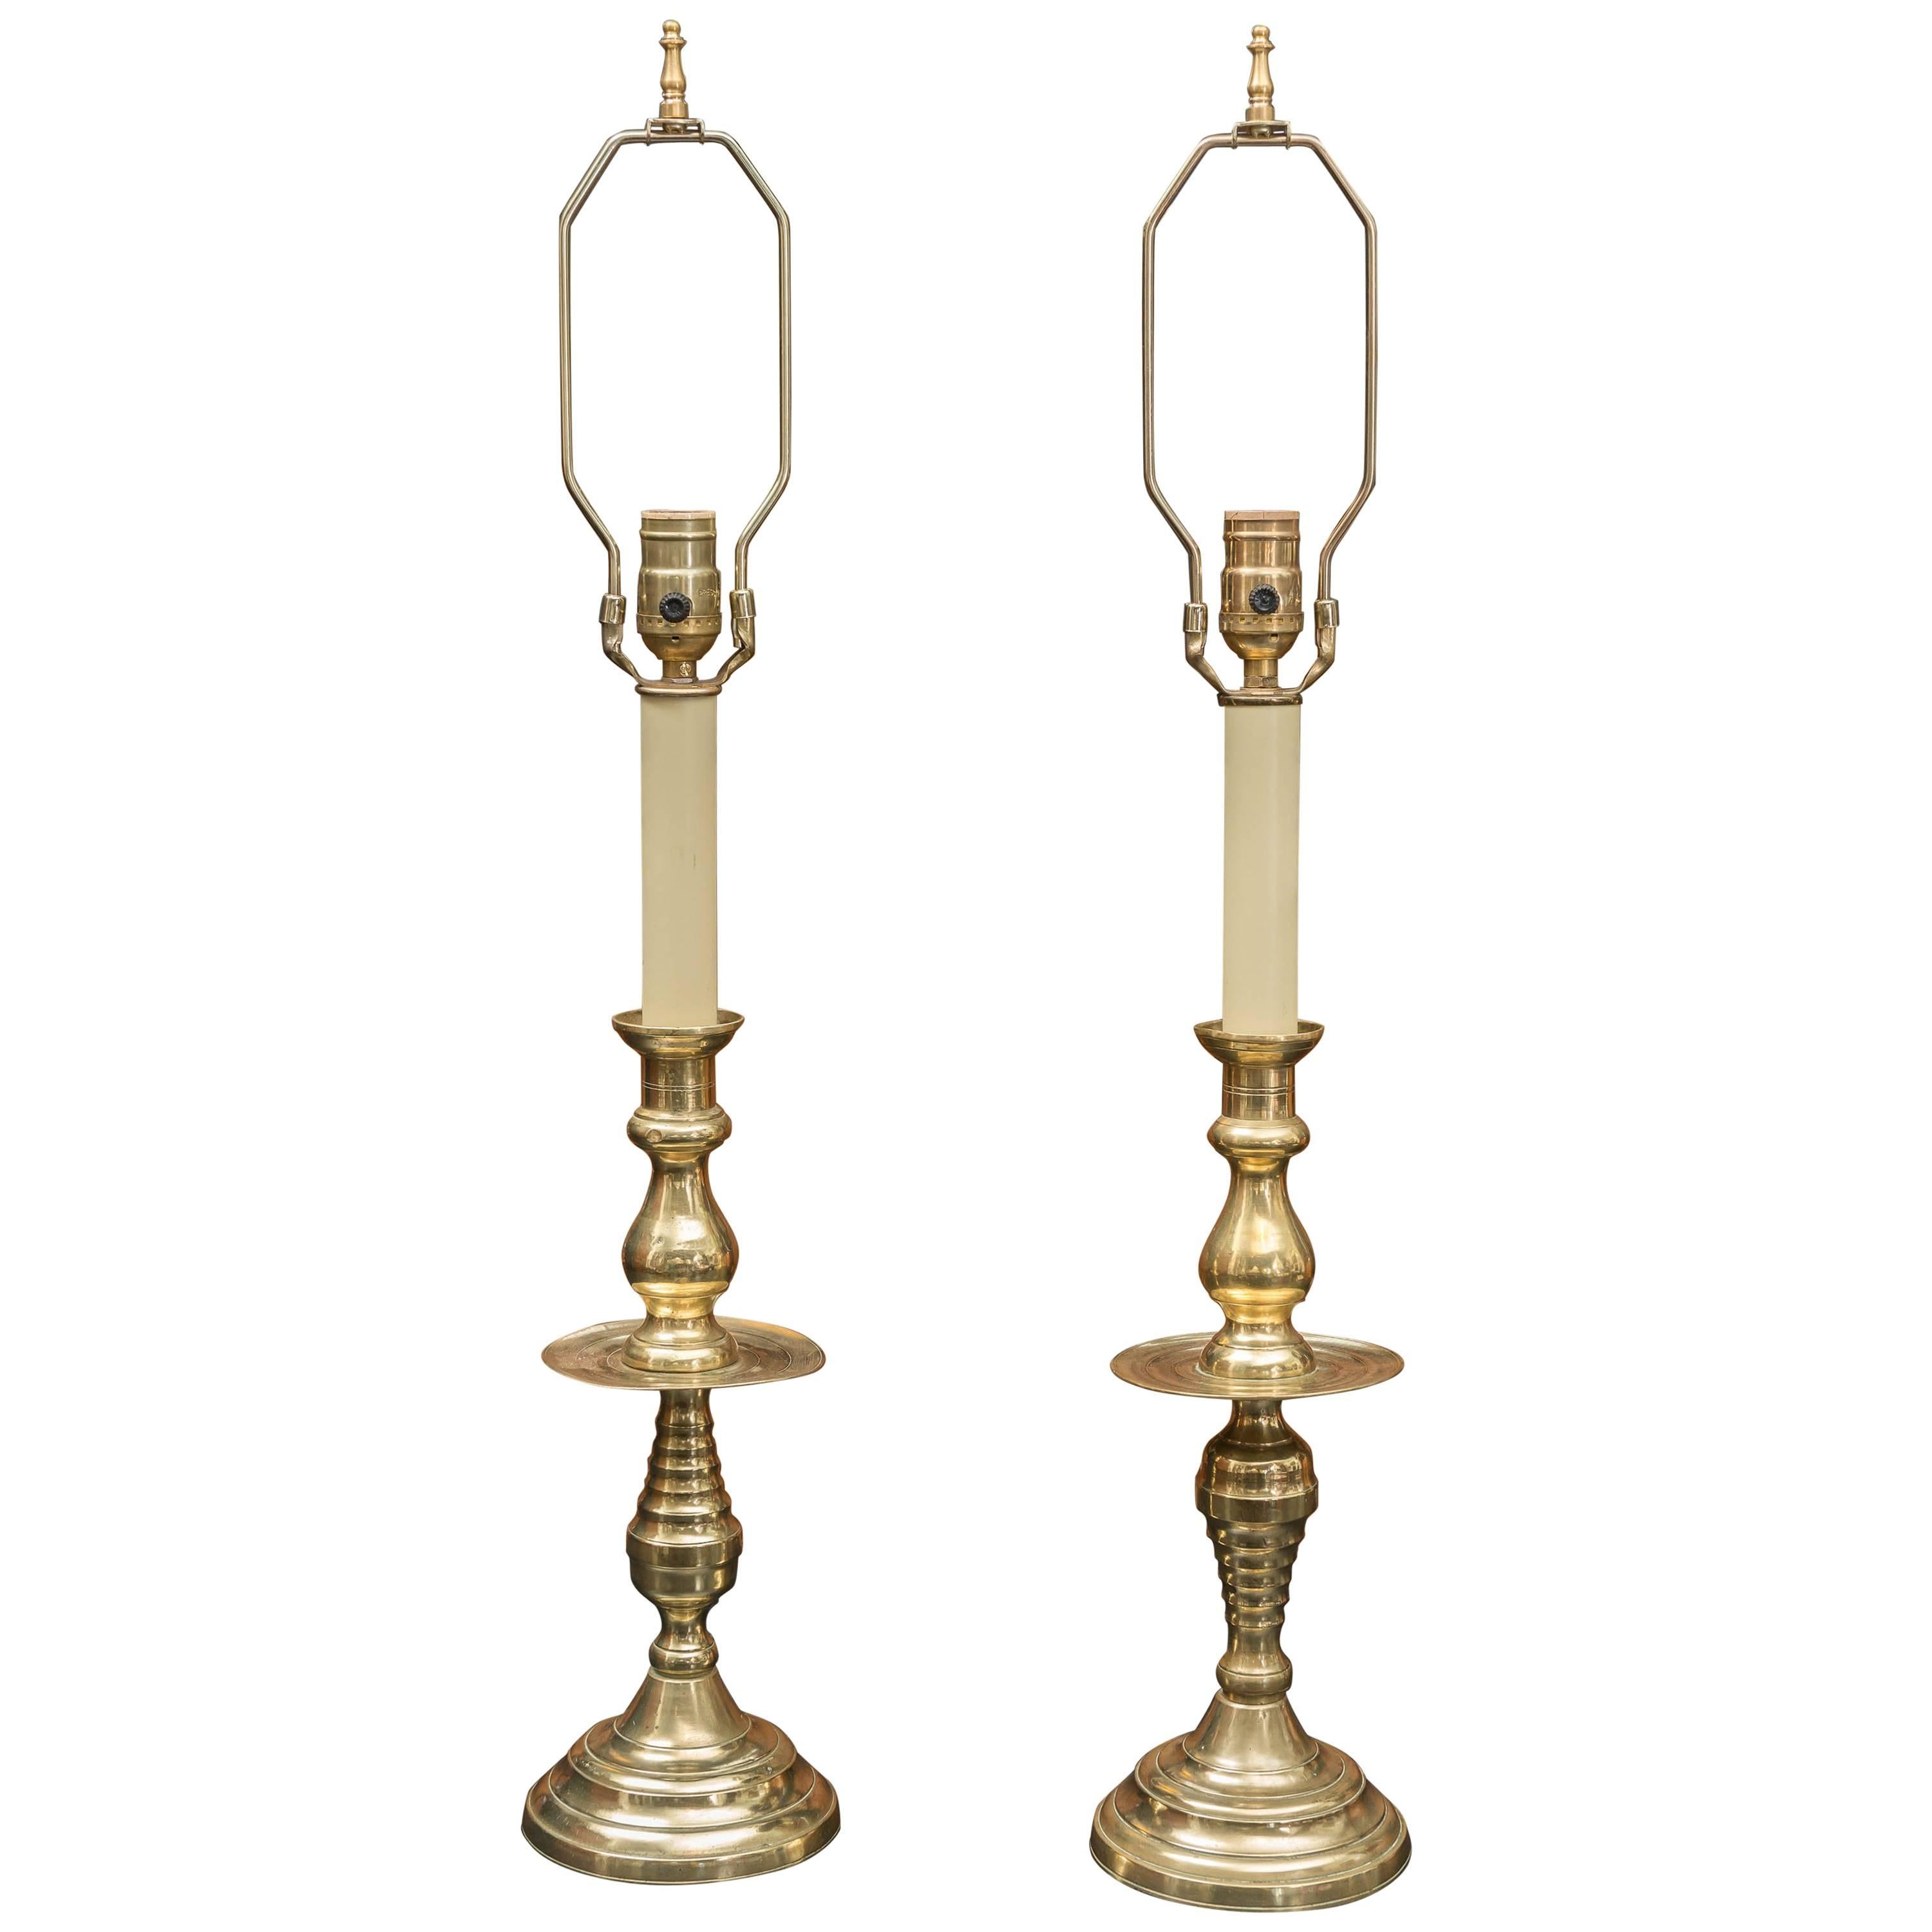 Pair of Late 19th Century Large Scale English Brass Candlestick Lamps 